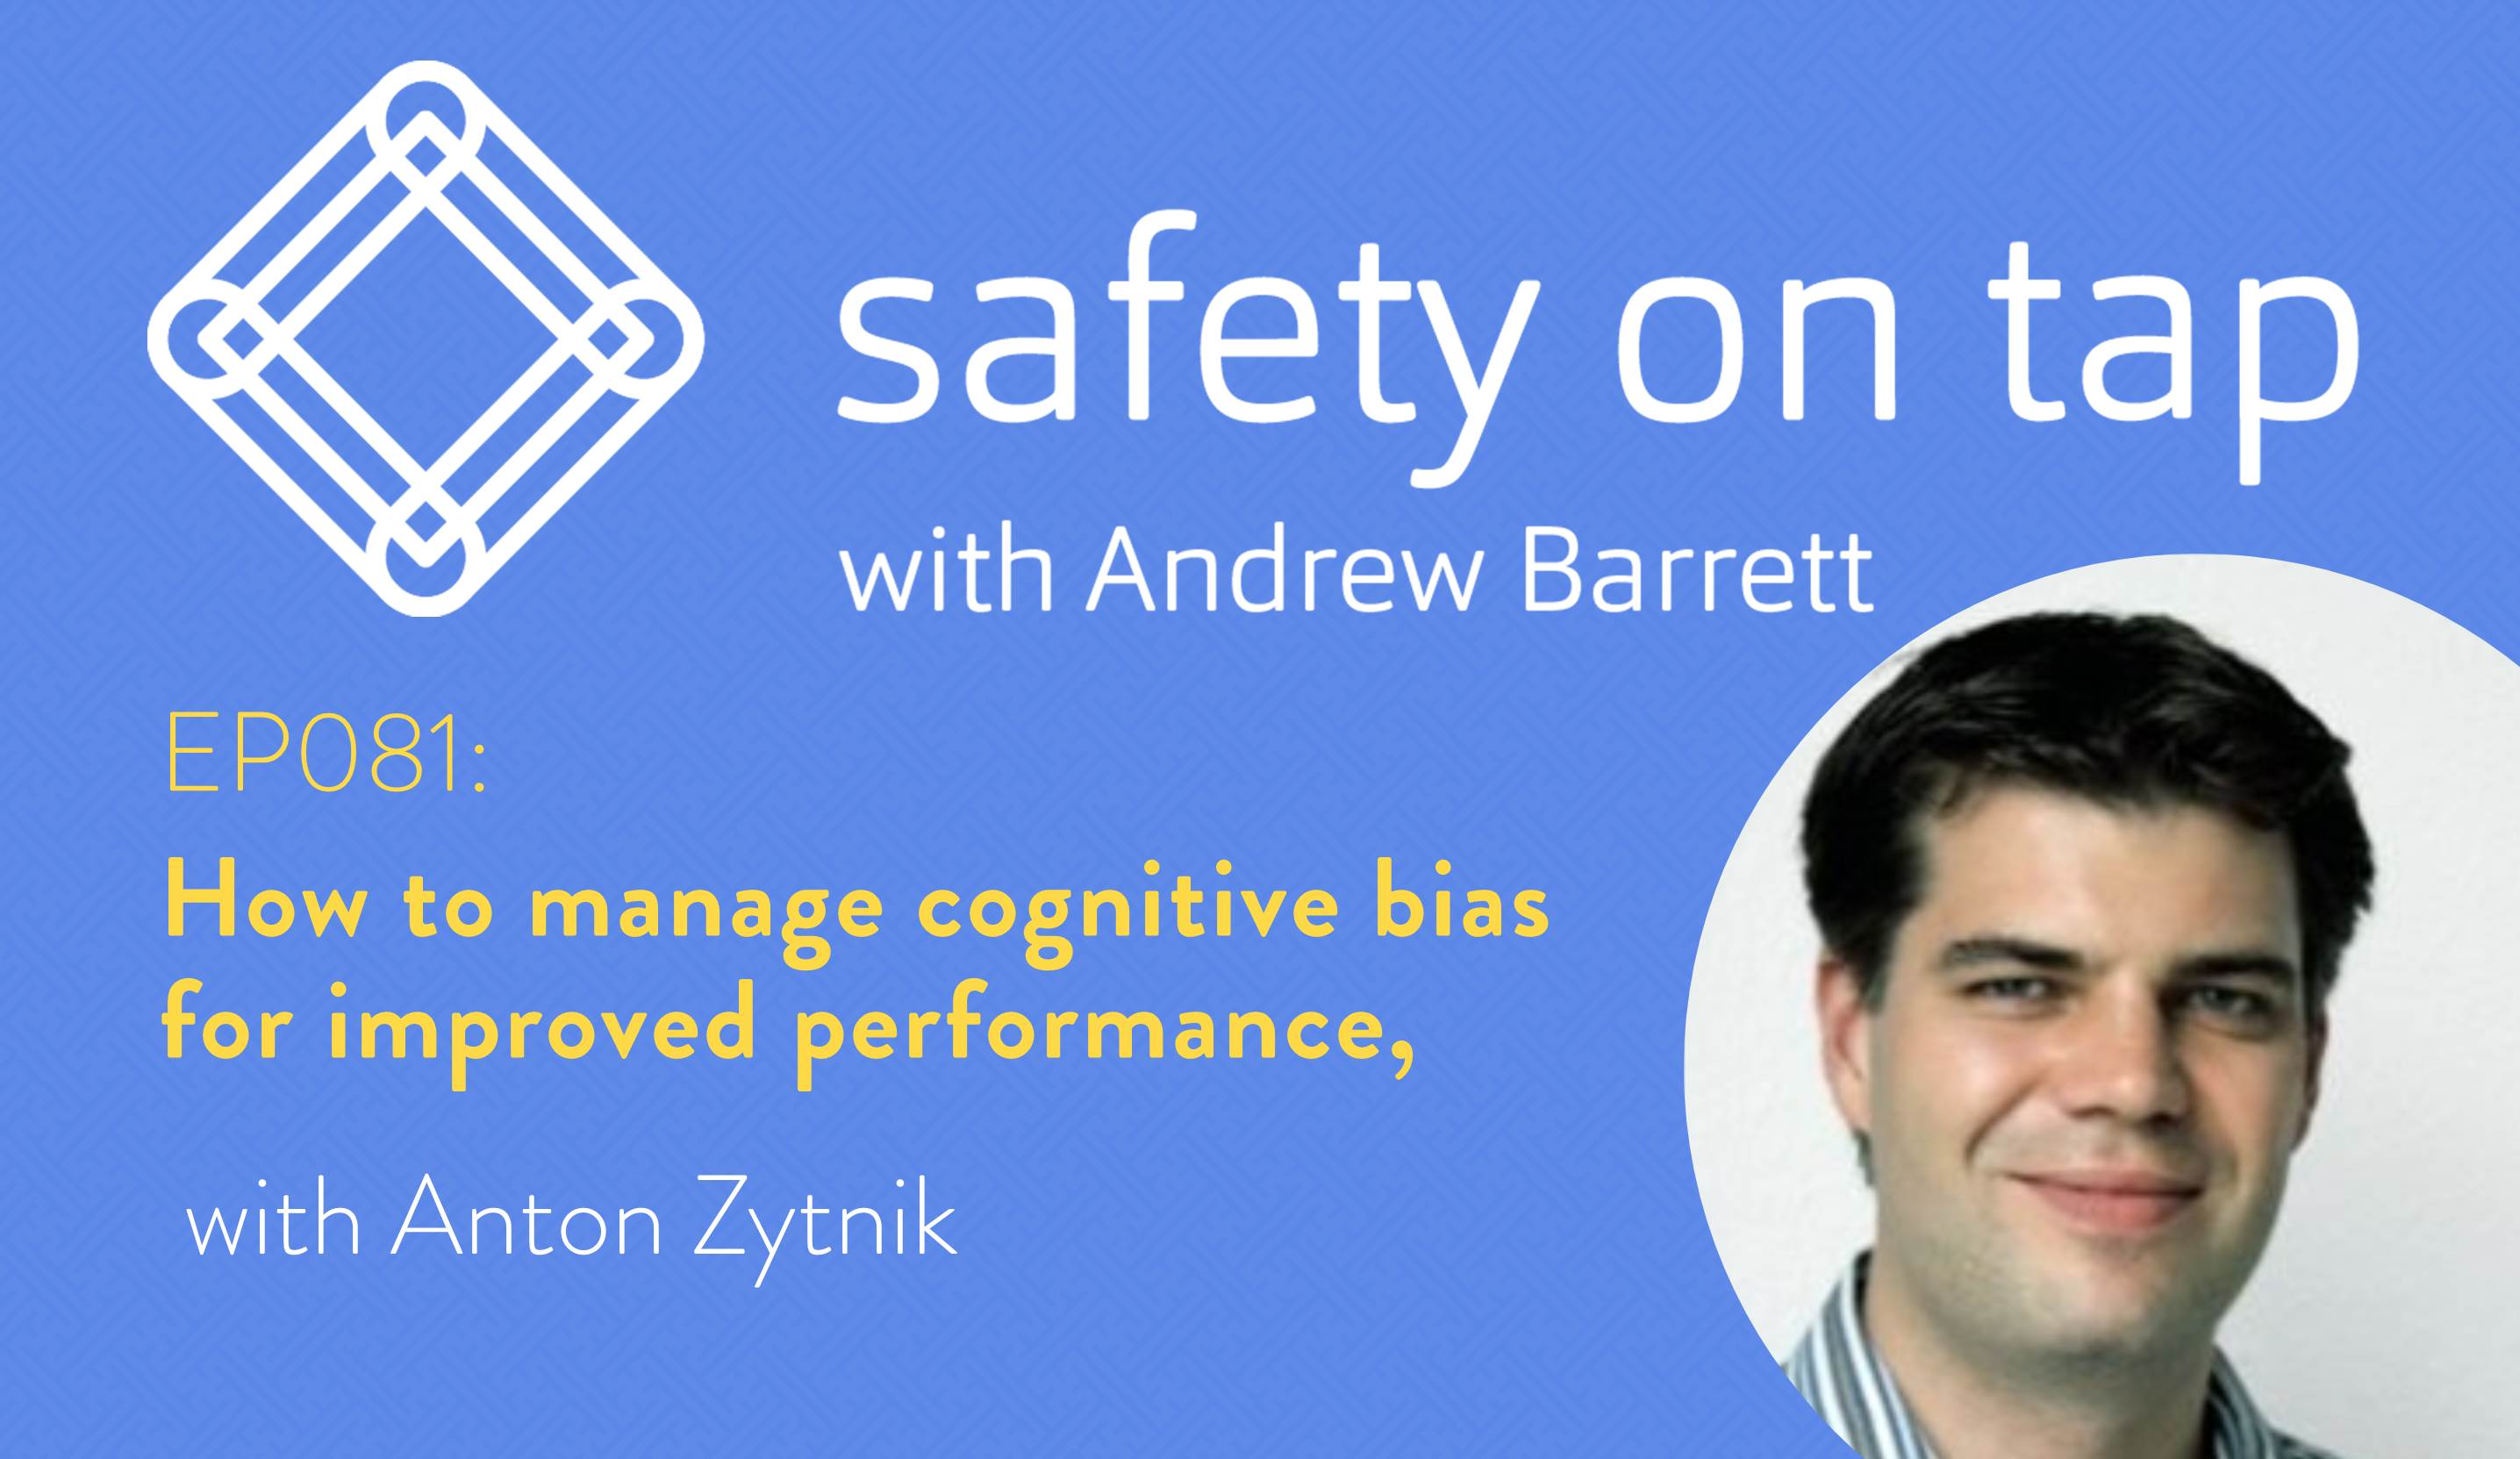 Ep081: How to manage cognitive bias for improved performance, with Anton Zytnik